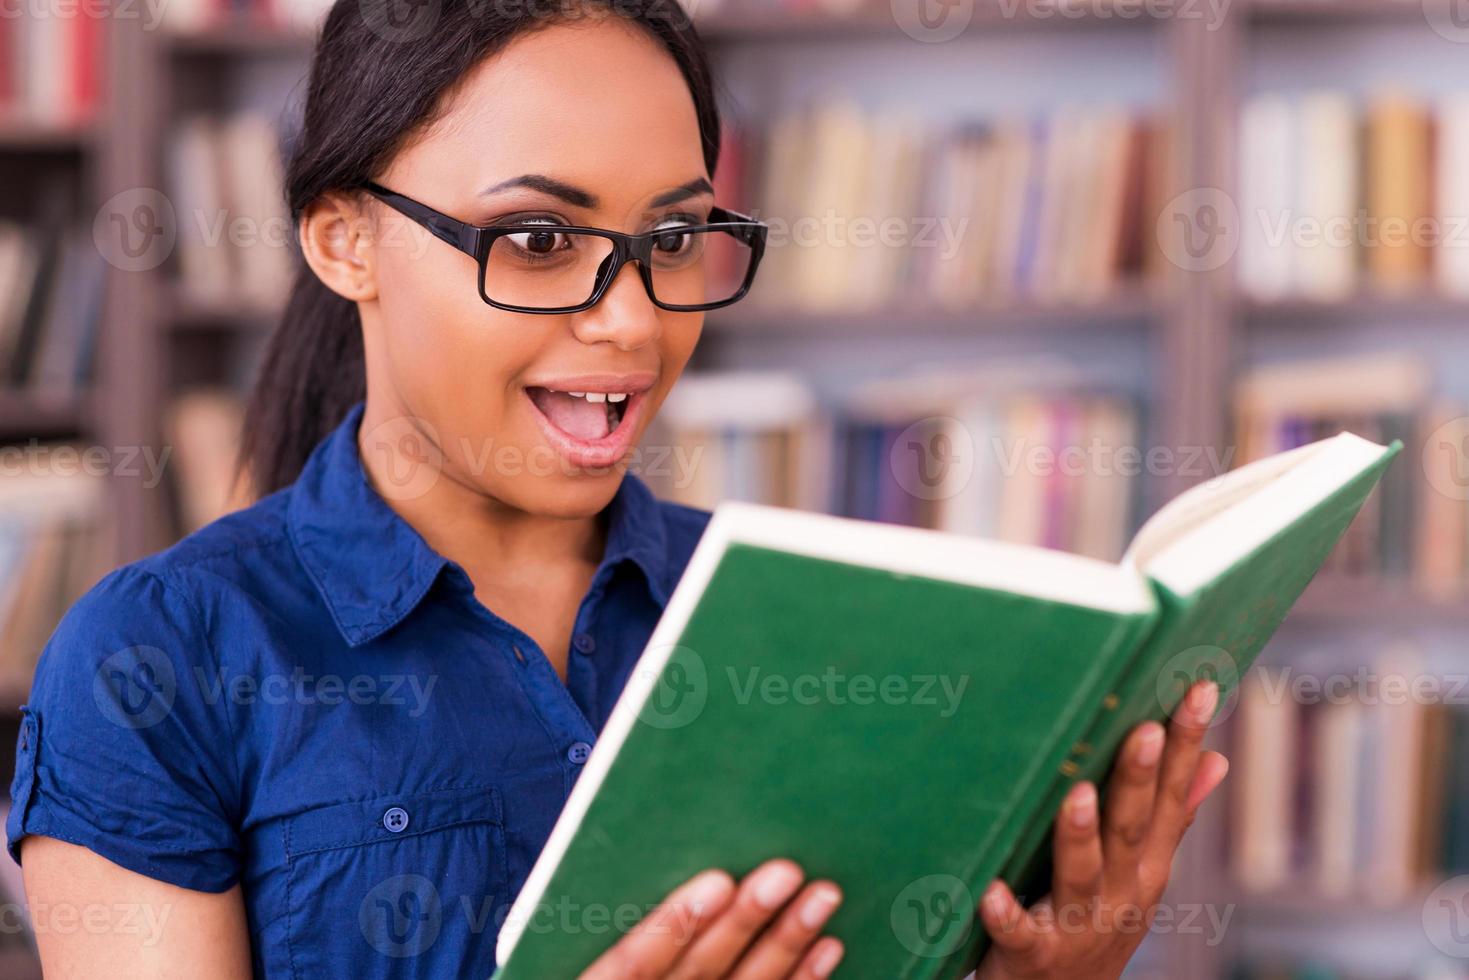 What an exciting book Excited African female student reading a book and keeping mouth open while standing in library photo